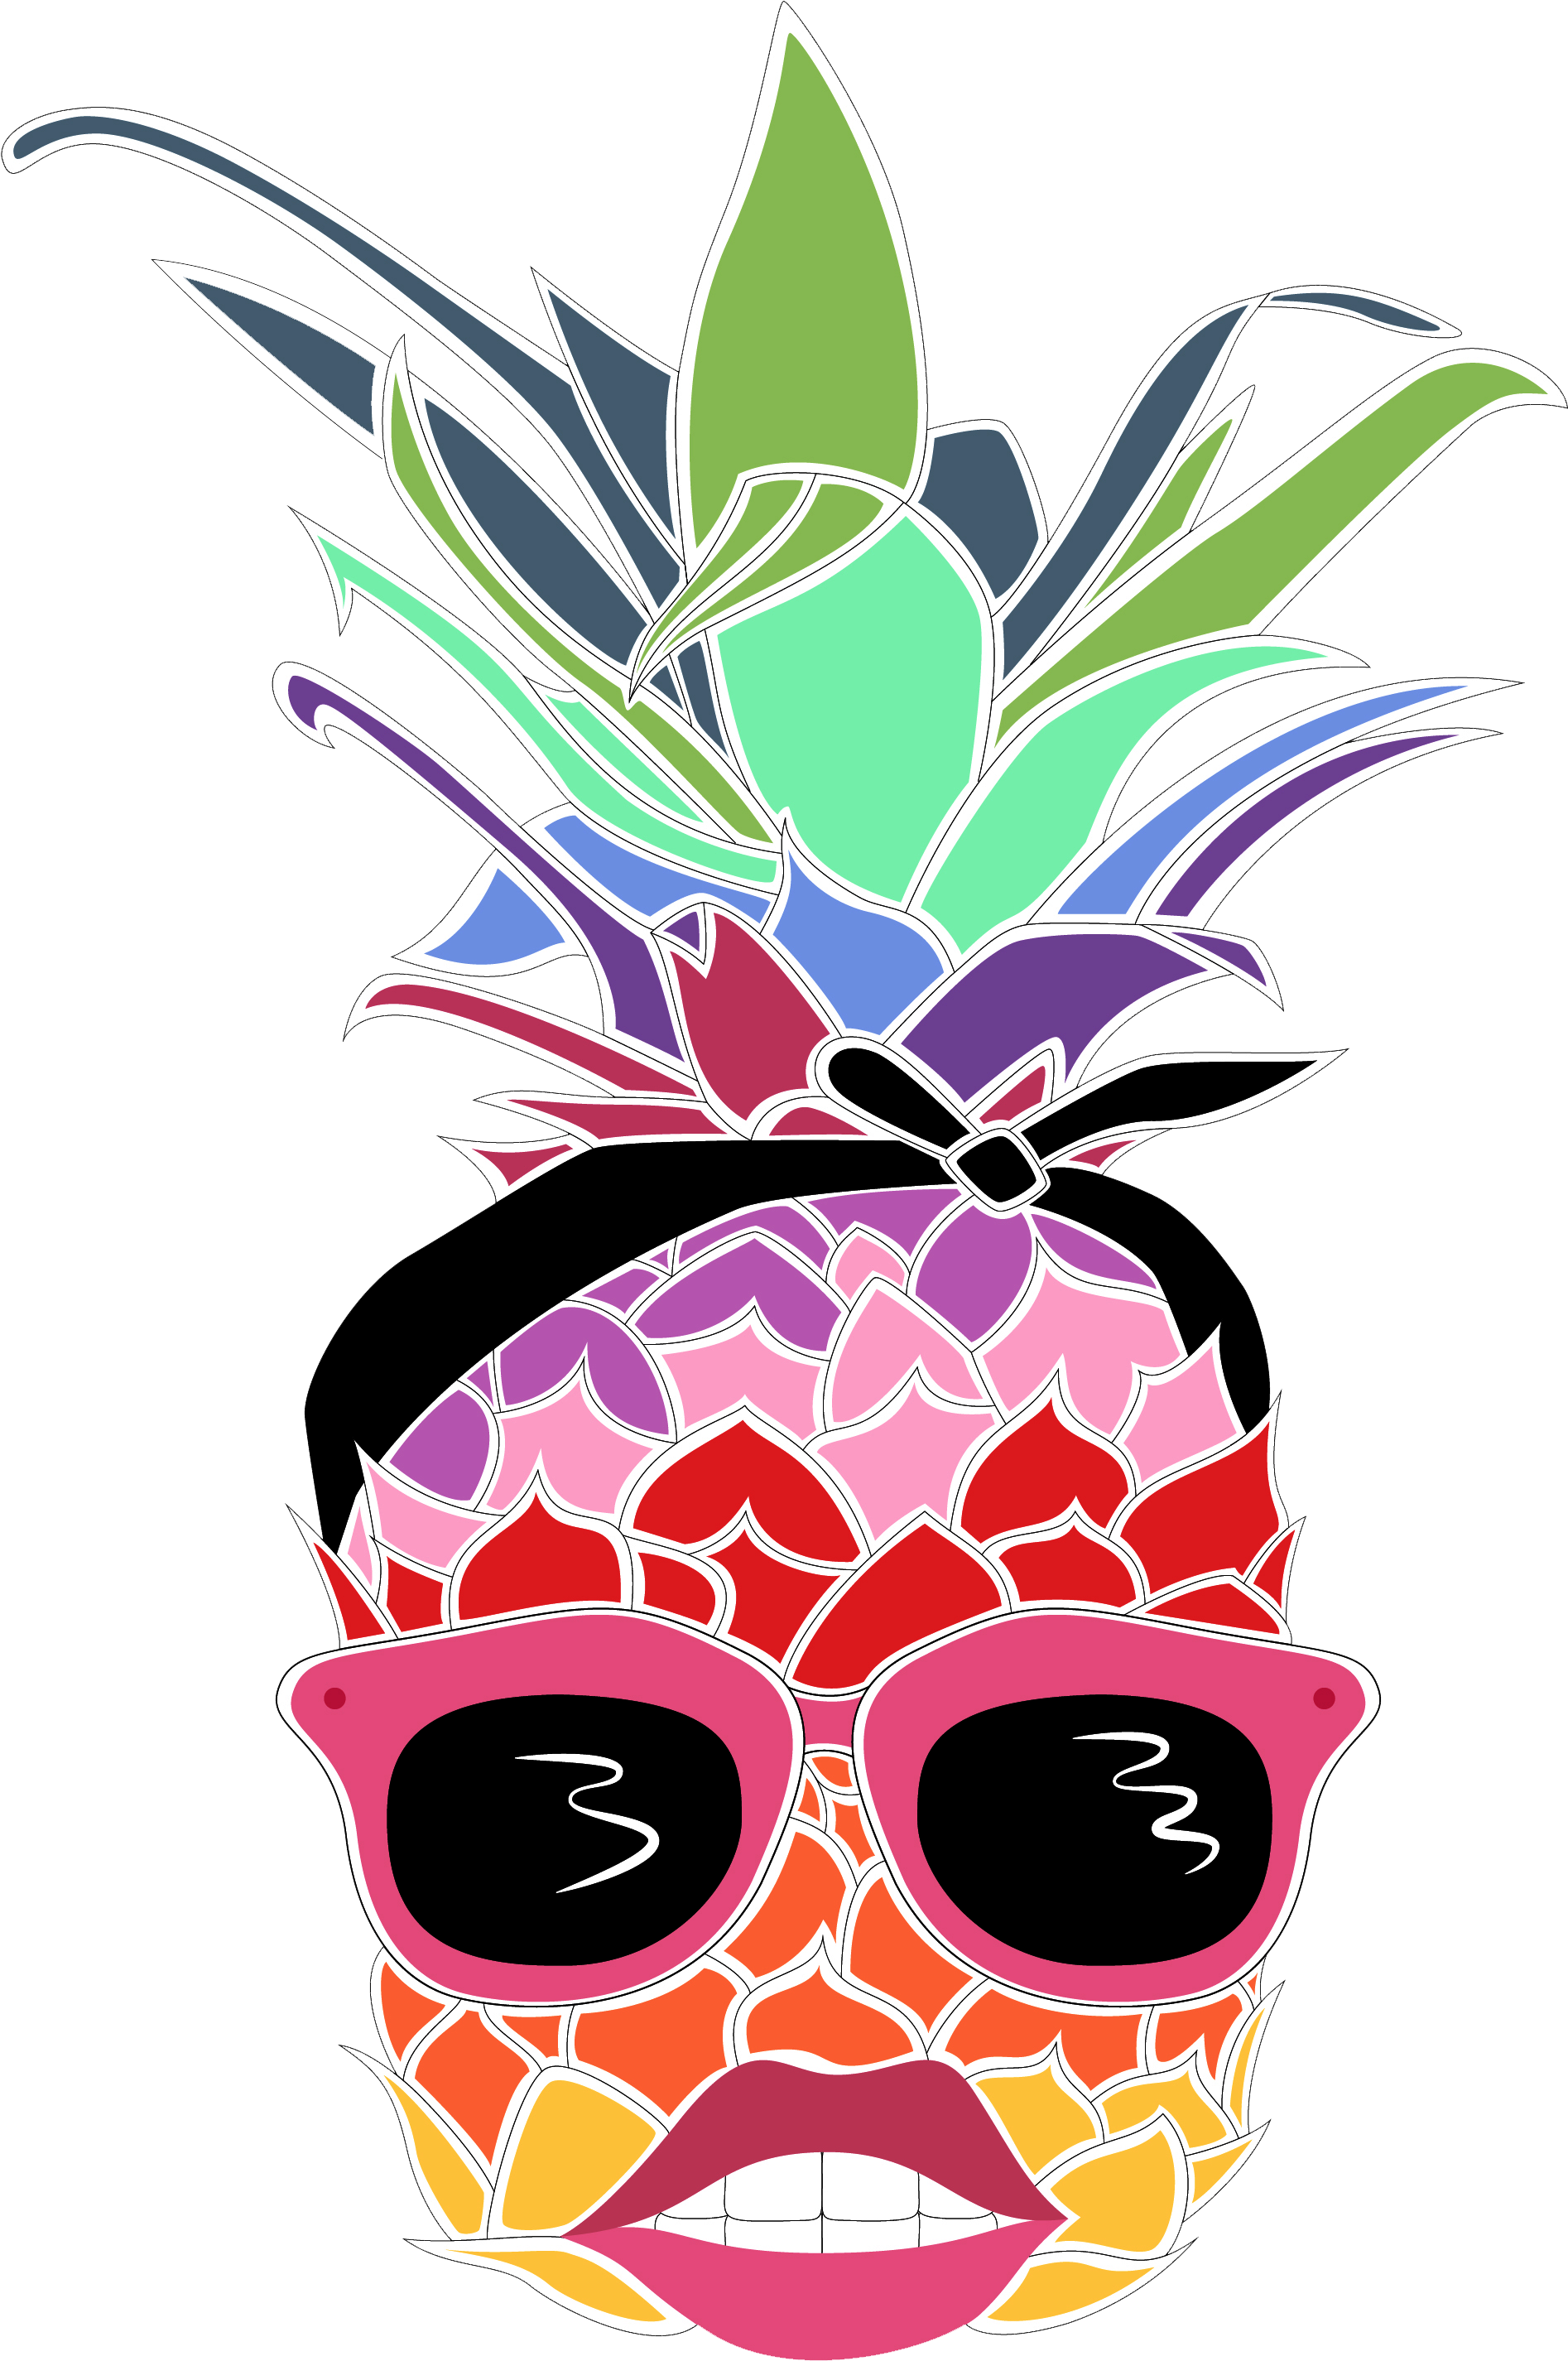 Today I Am Posting Pineapple Pin-up - Pineapple (2550x3300)